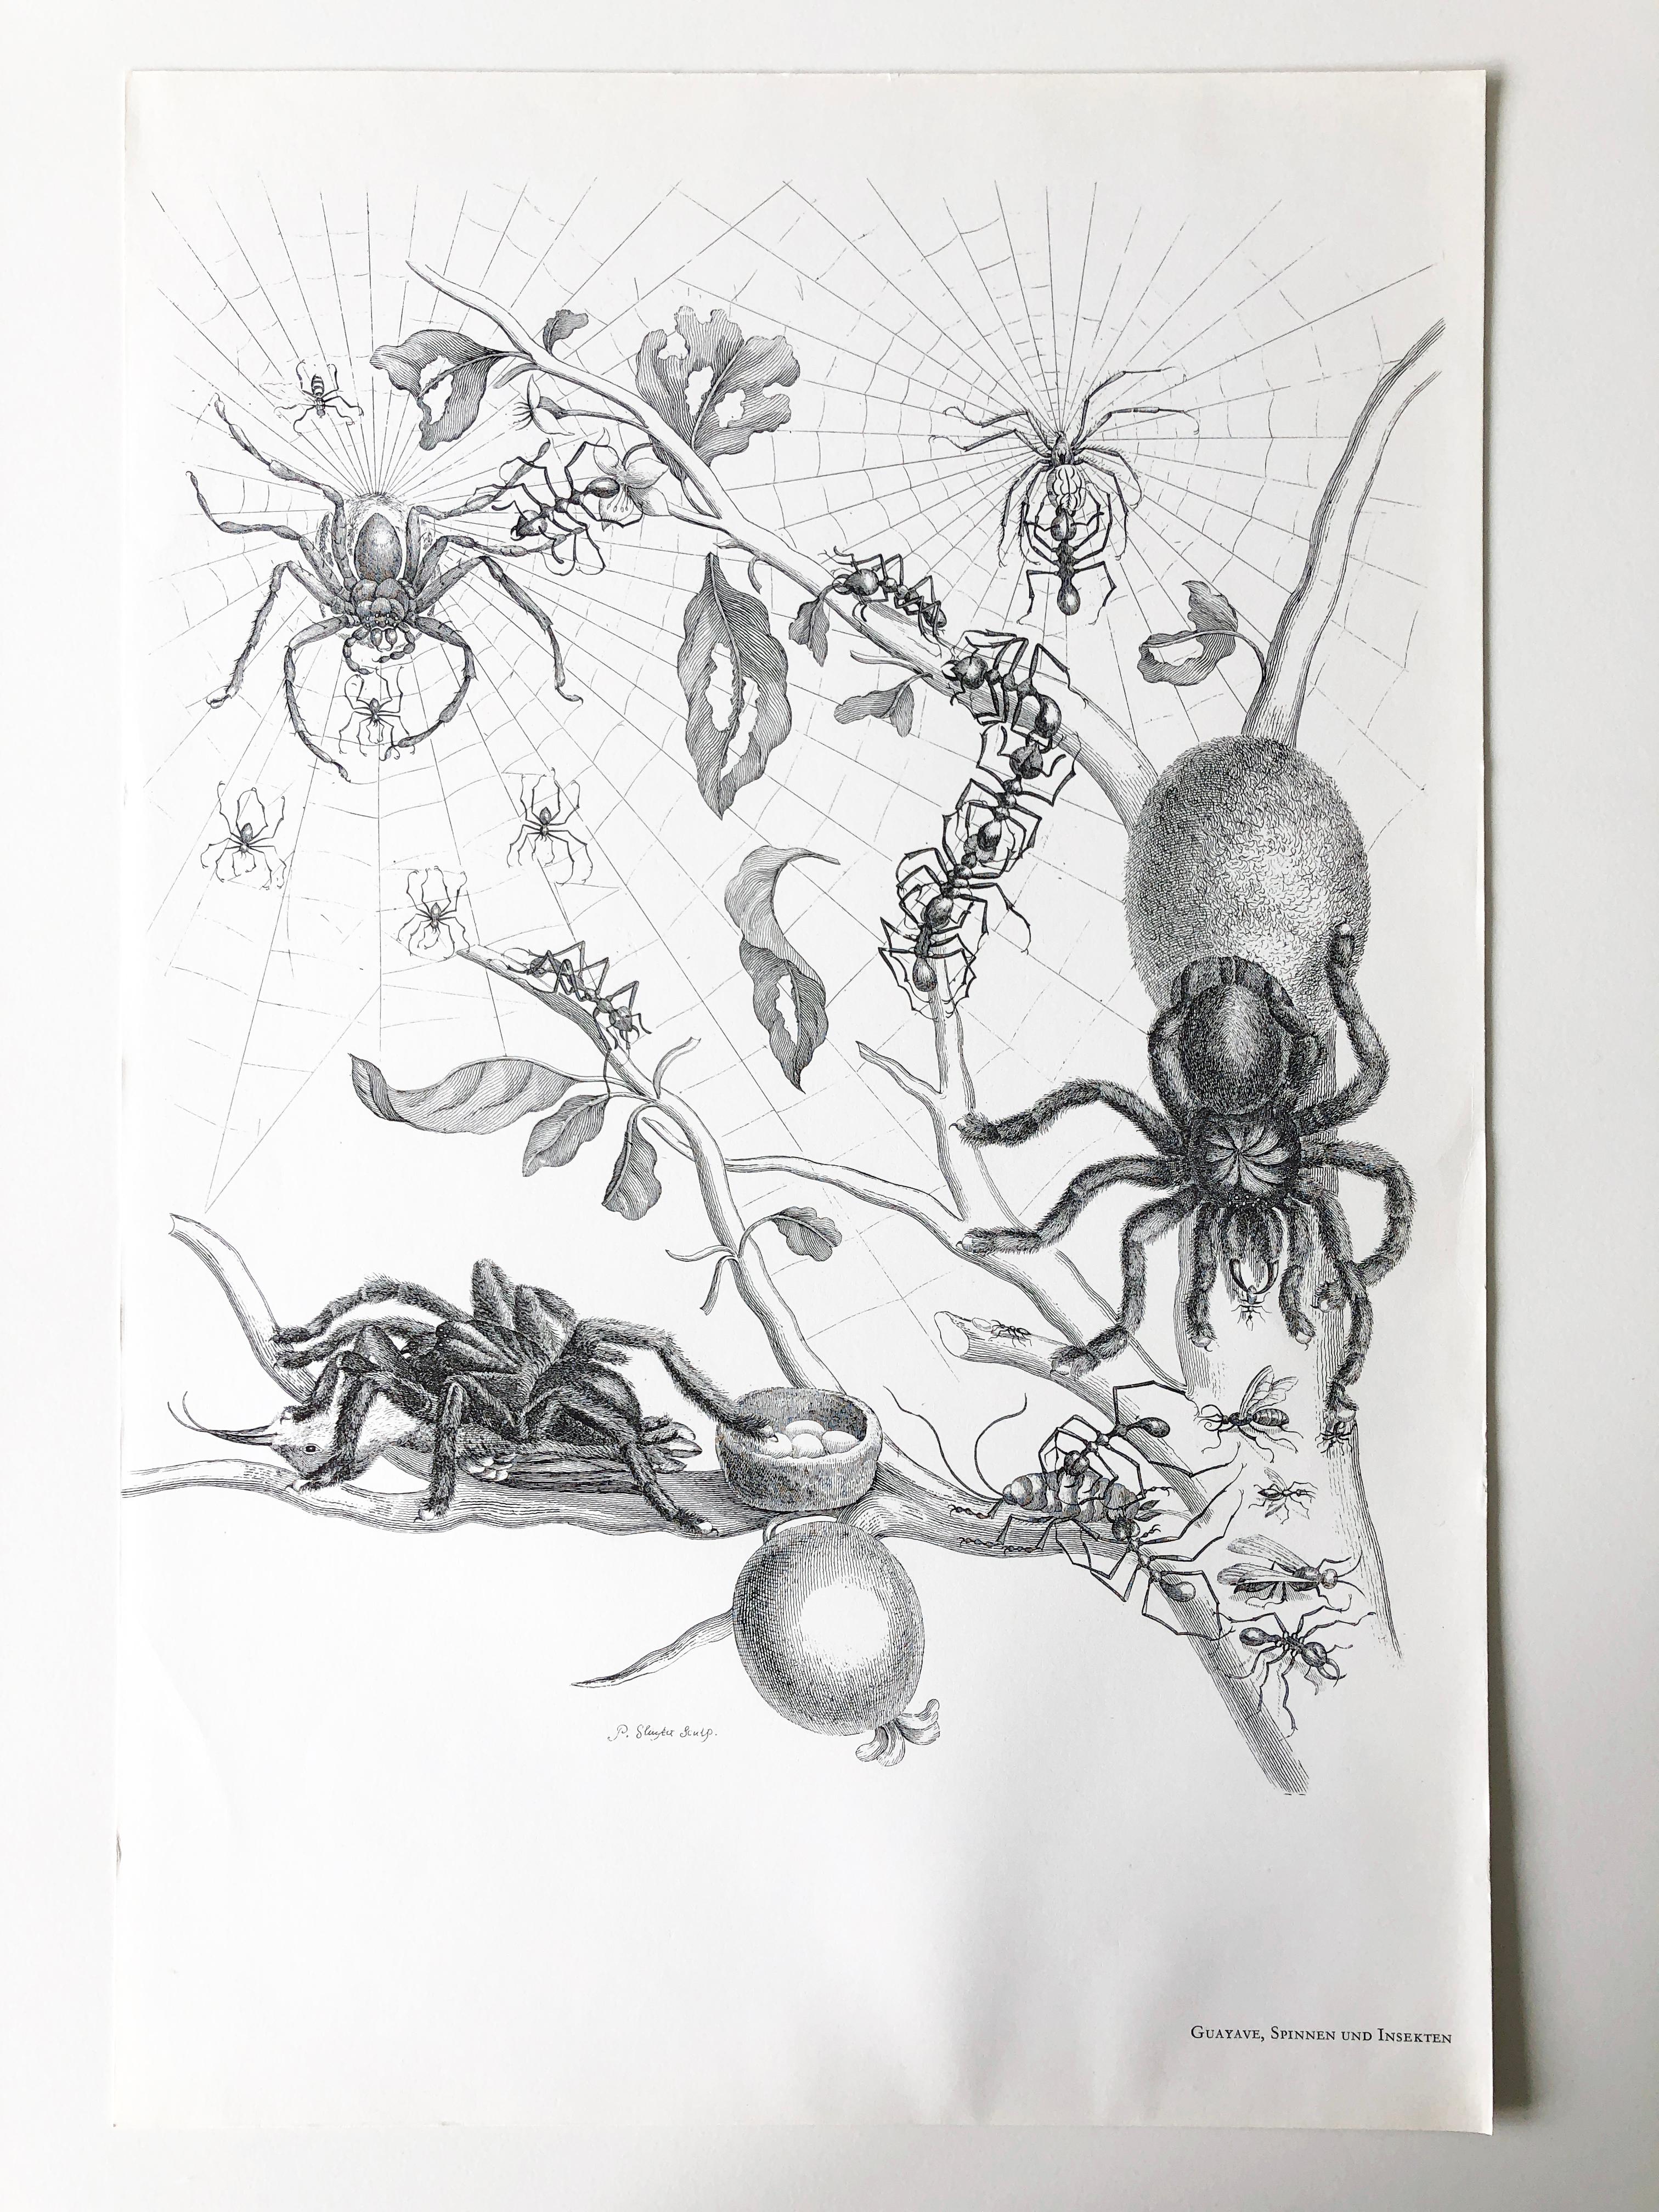 Other Maria Sibylla Merian - P. Sluyter Sculp - Guayave spiders and insects Nr.18 For Sale